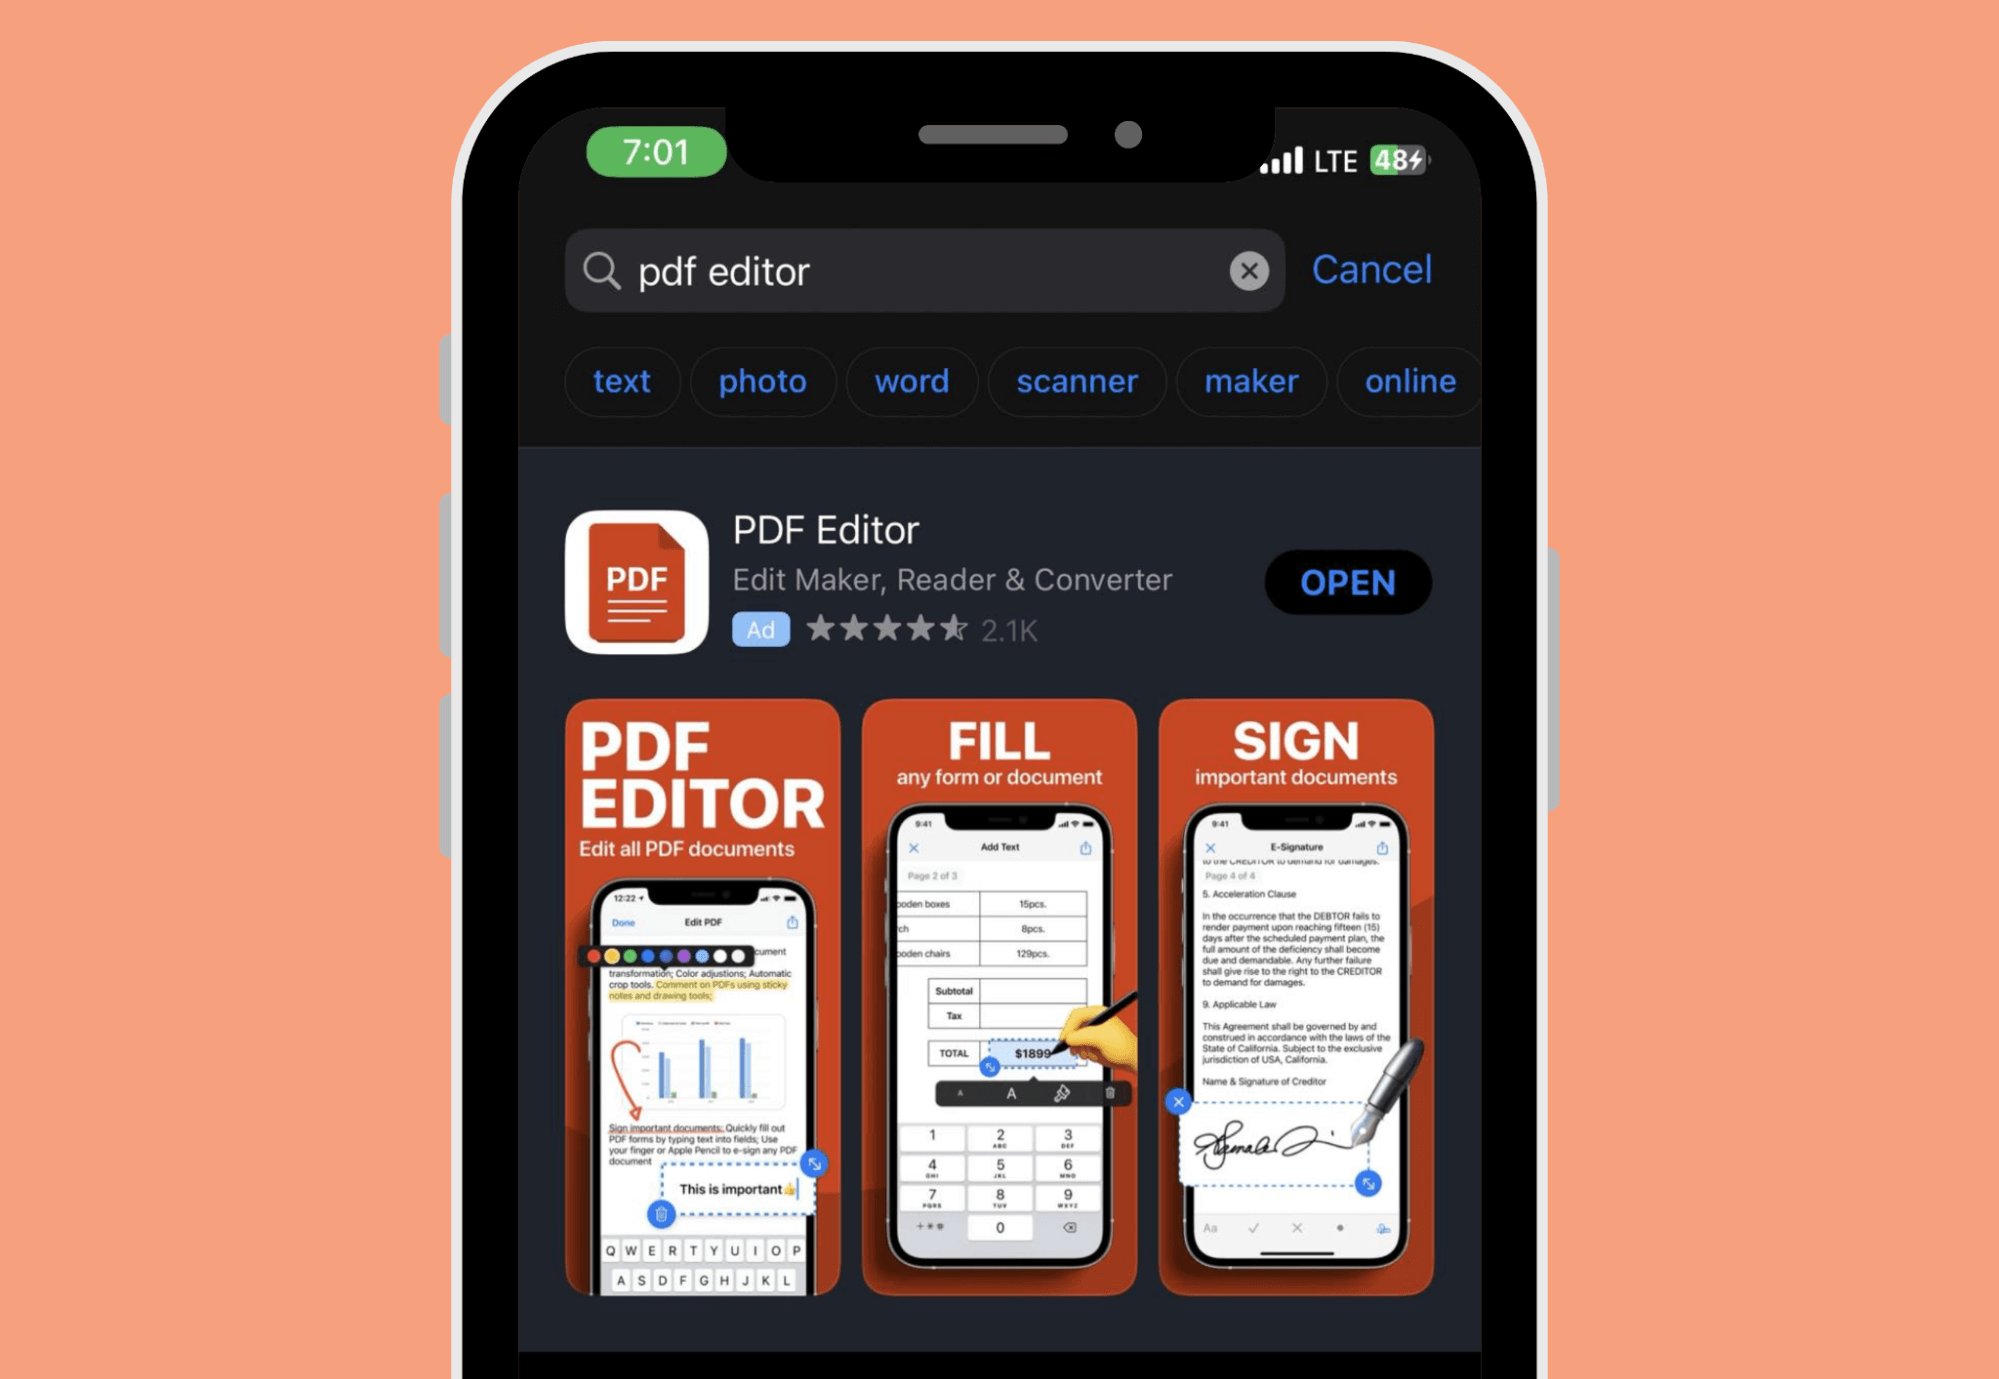 Appstore with PDF Editor in the search bar